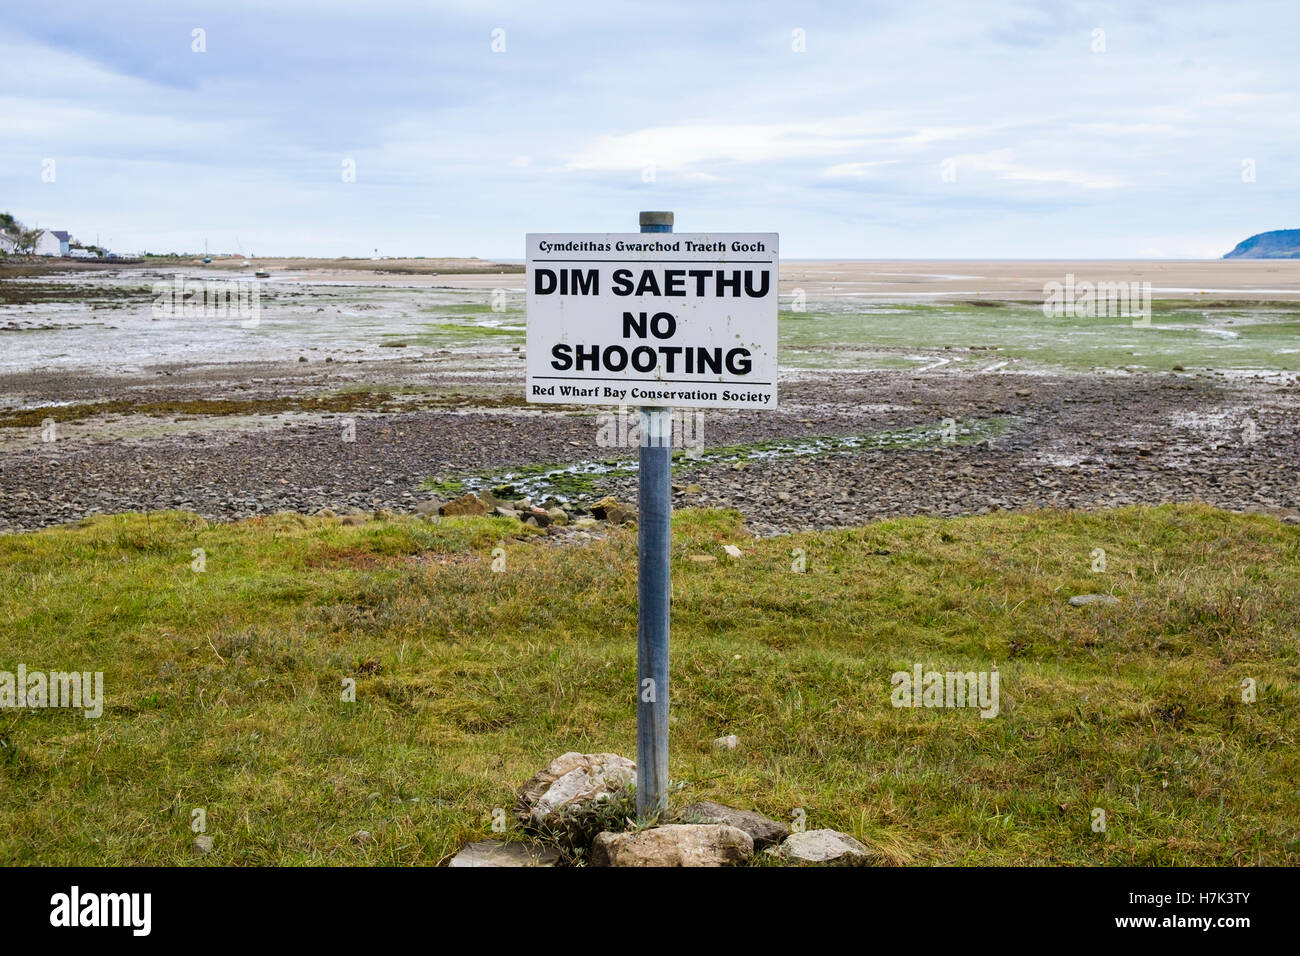 Bilingual 'No Shooting' sign in Welsh and English on salt marsh habitat in Red Wharf Bay (Traeth Coch) Isle of Anglesey Wales UK Britain Stock Photo